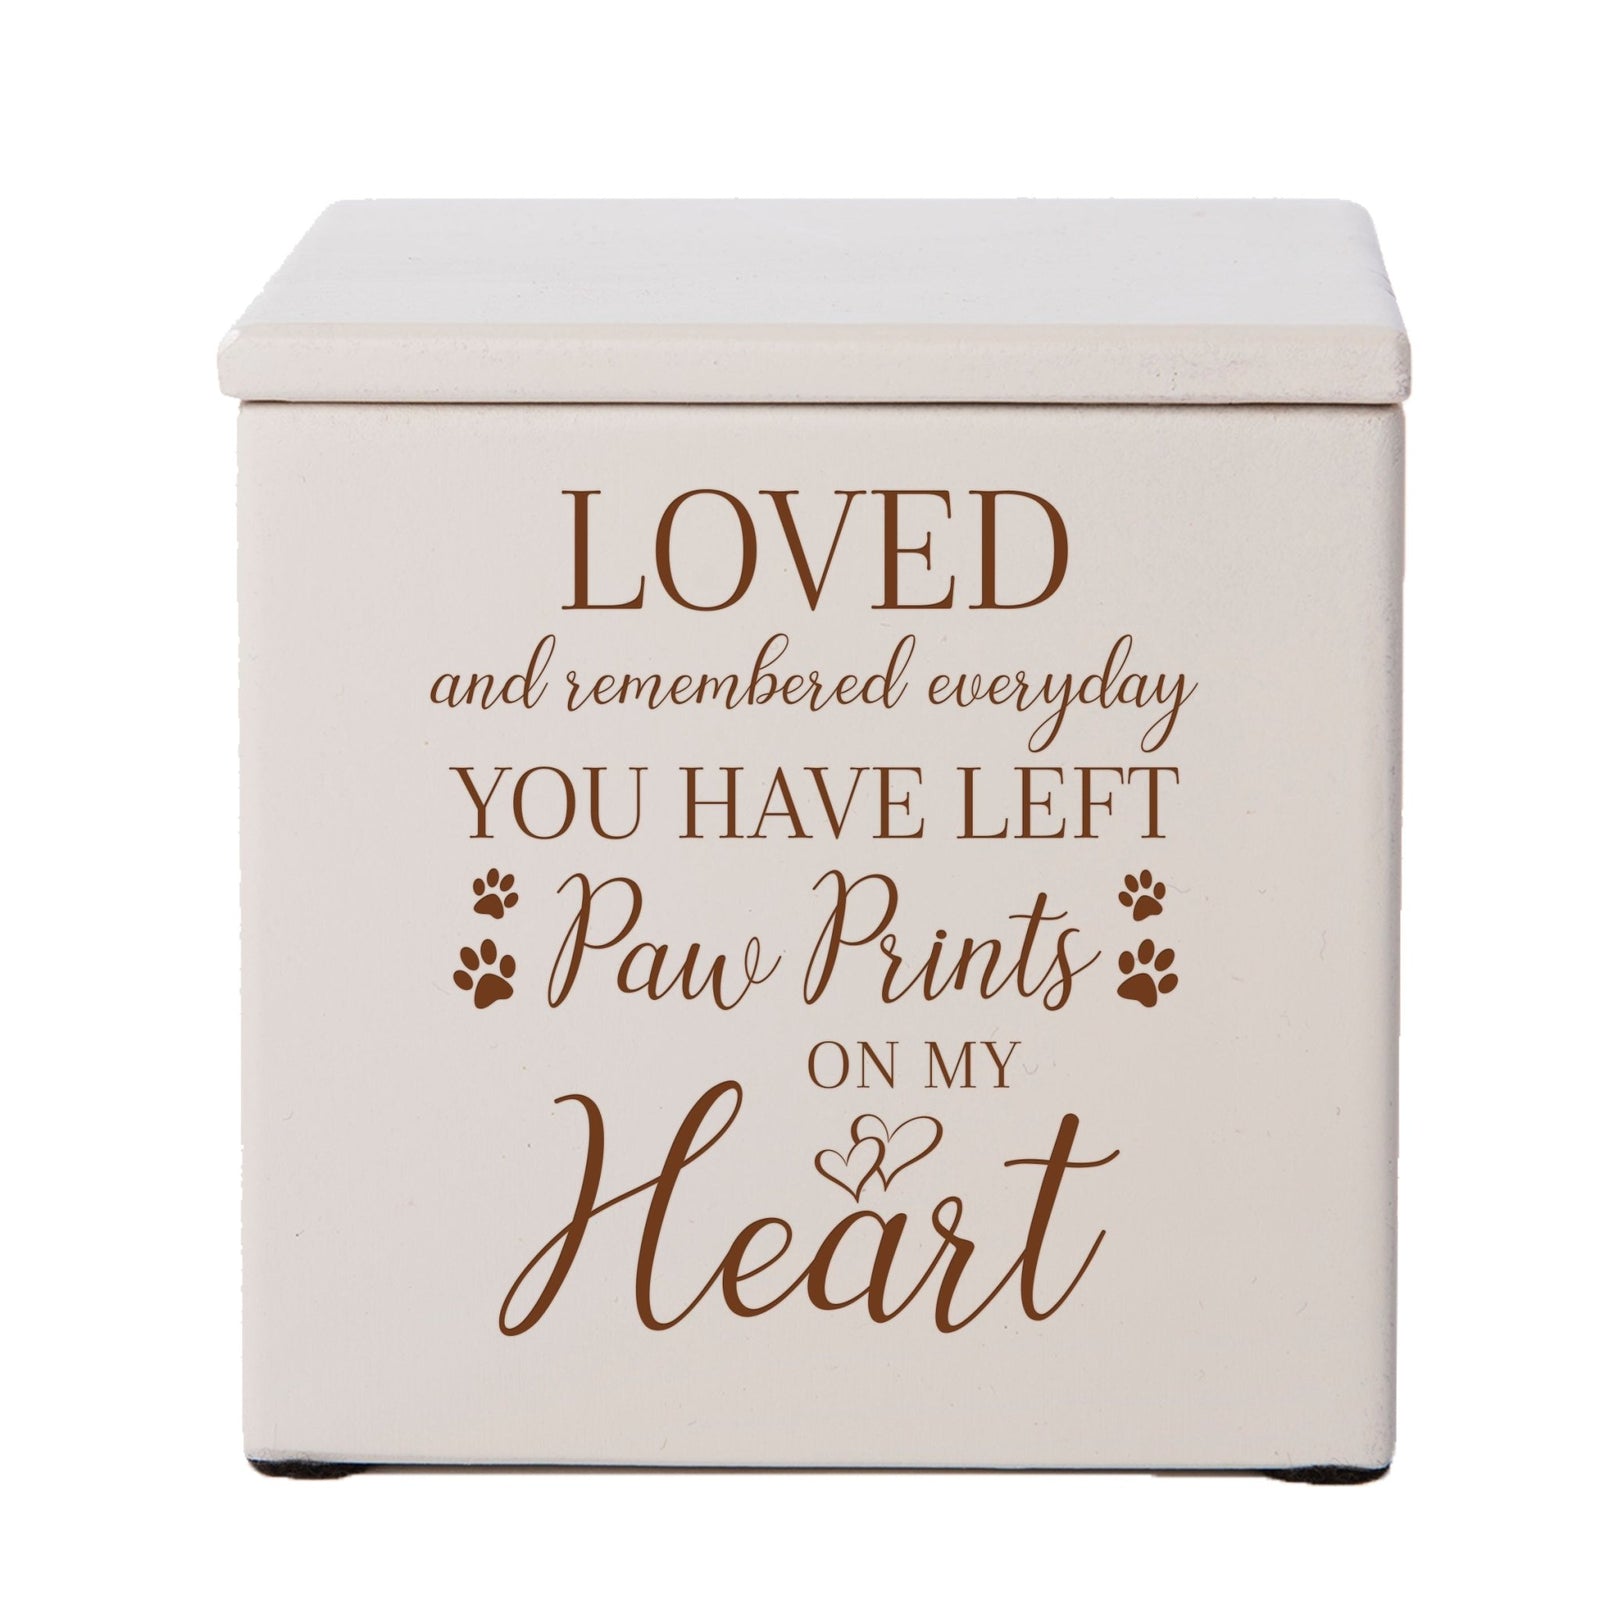 Pet Memorial Keepsake Cremation Urn Box for Dog or Cat - Loved and Remembered Everyday - LifeSong Milestones